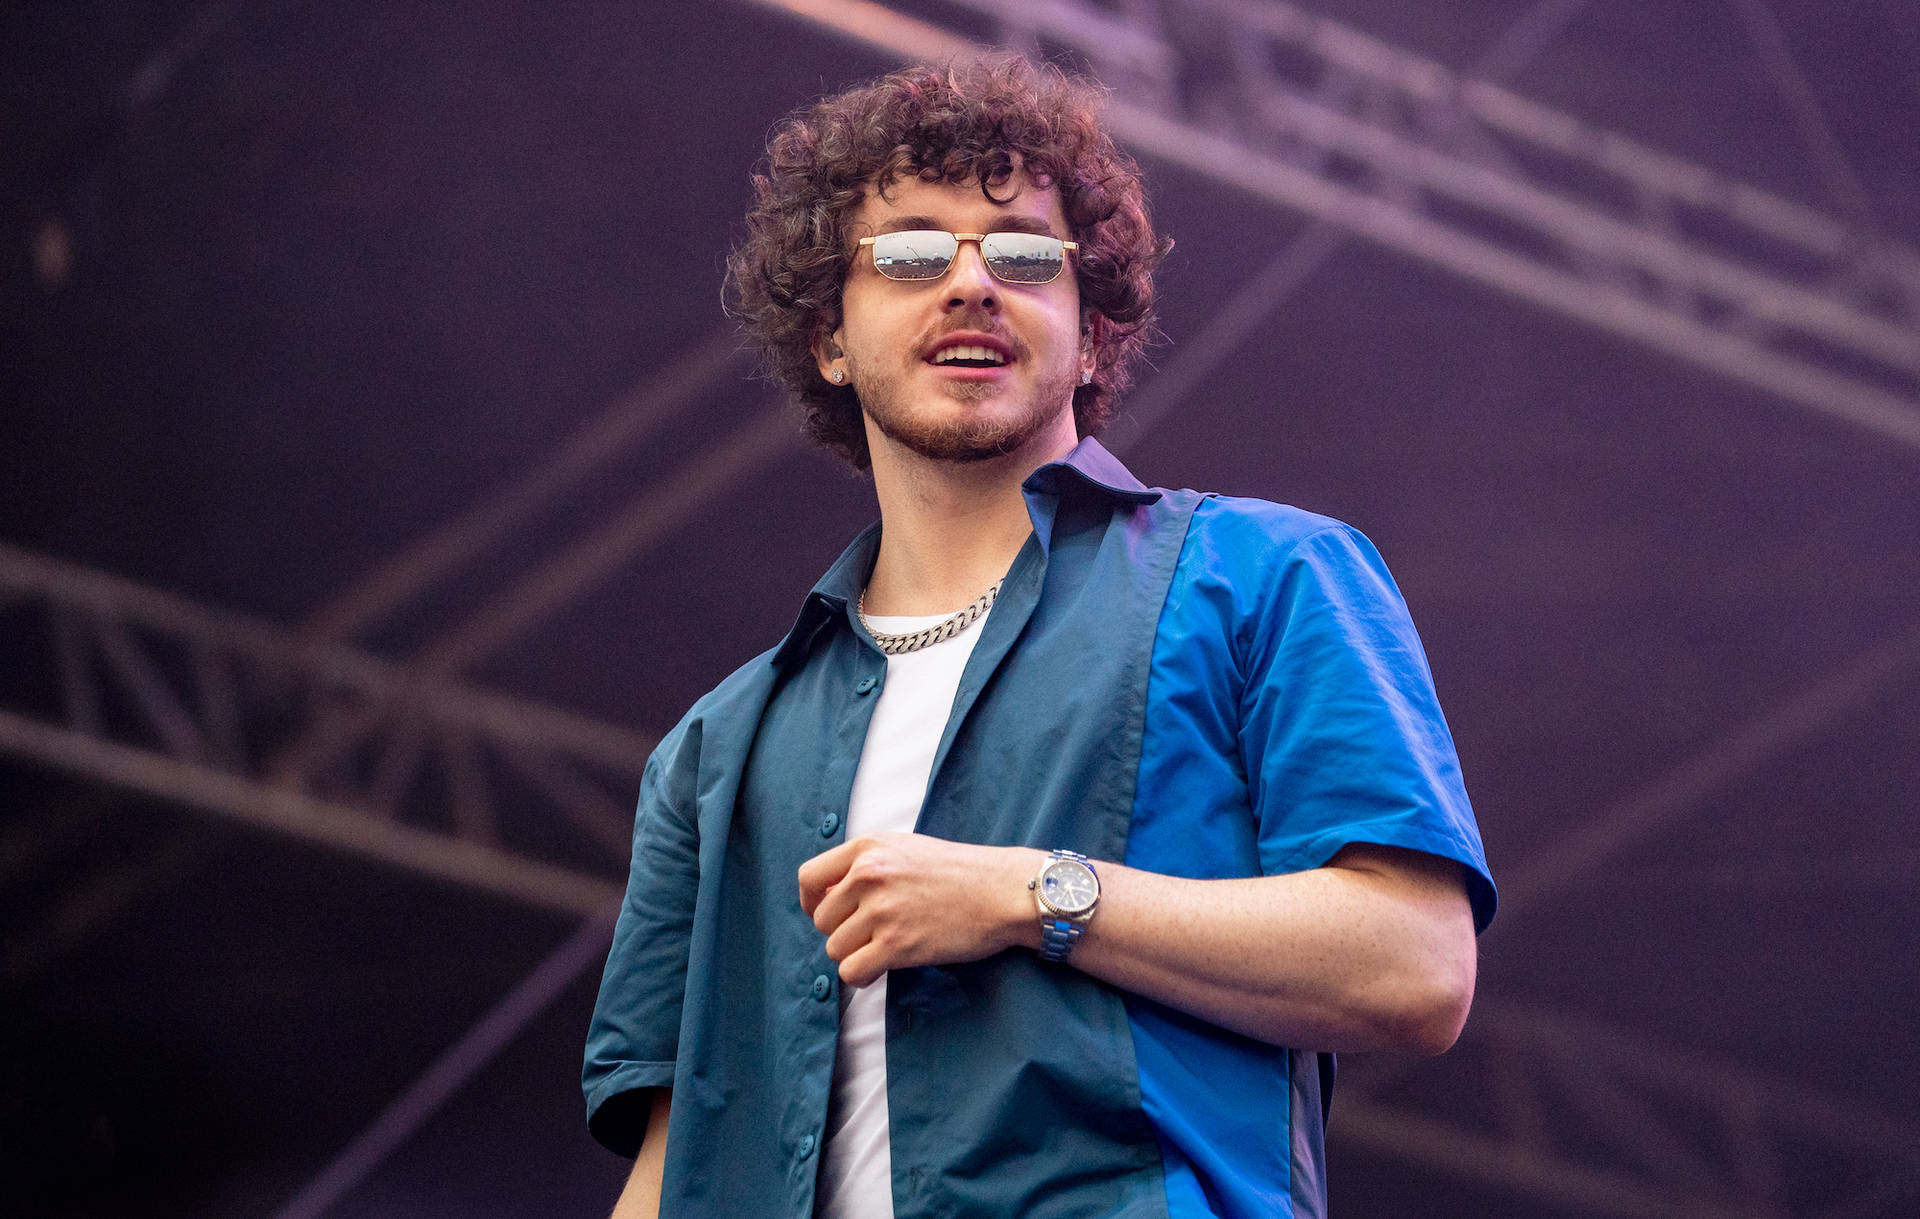 Jack Harlow On Stage Background